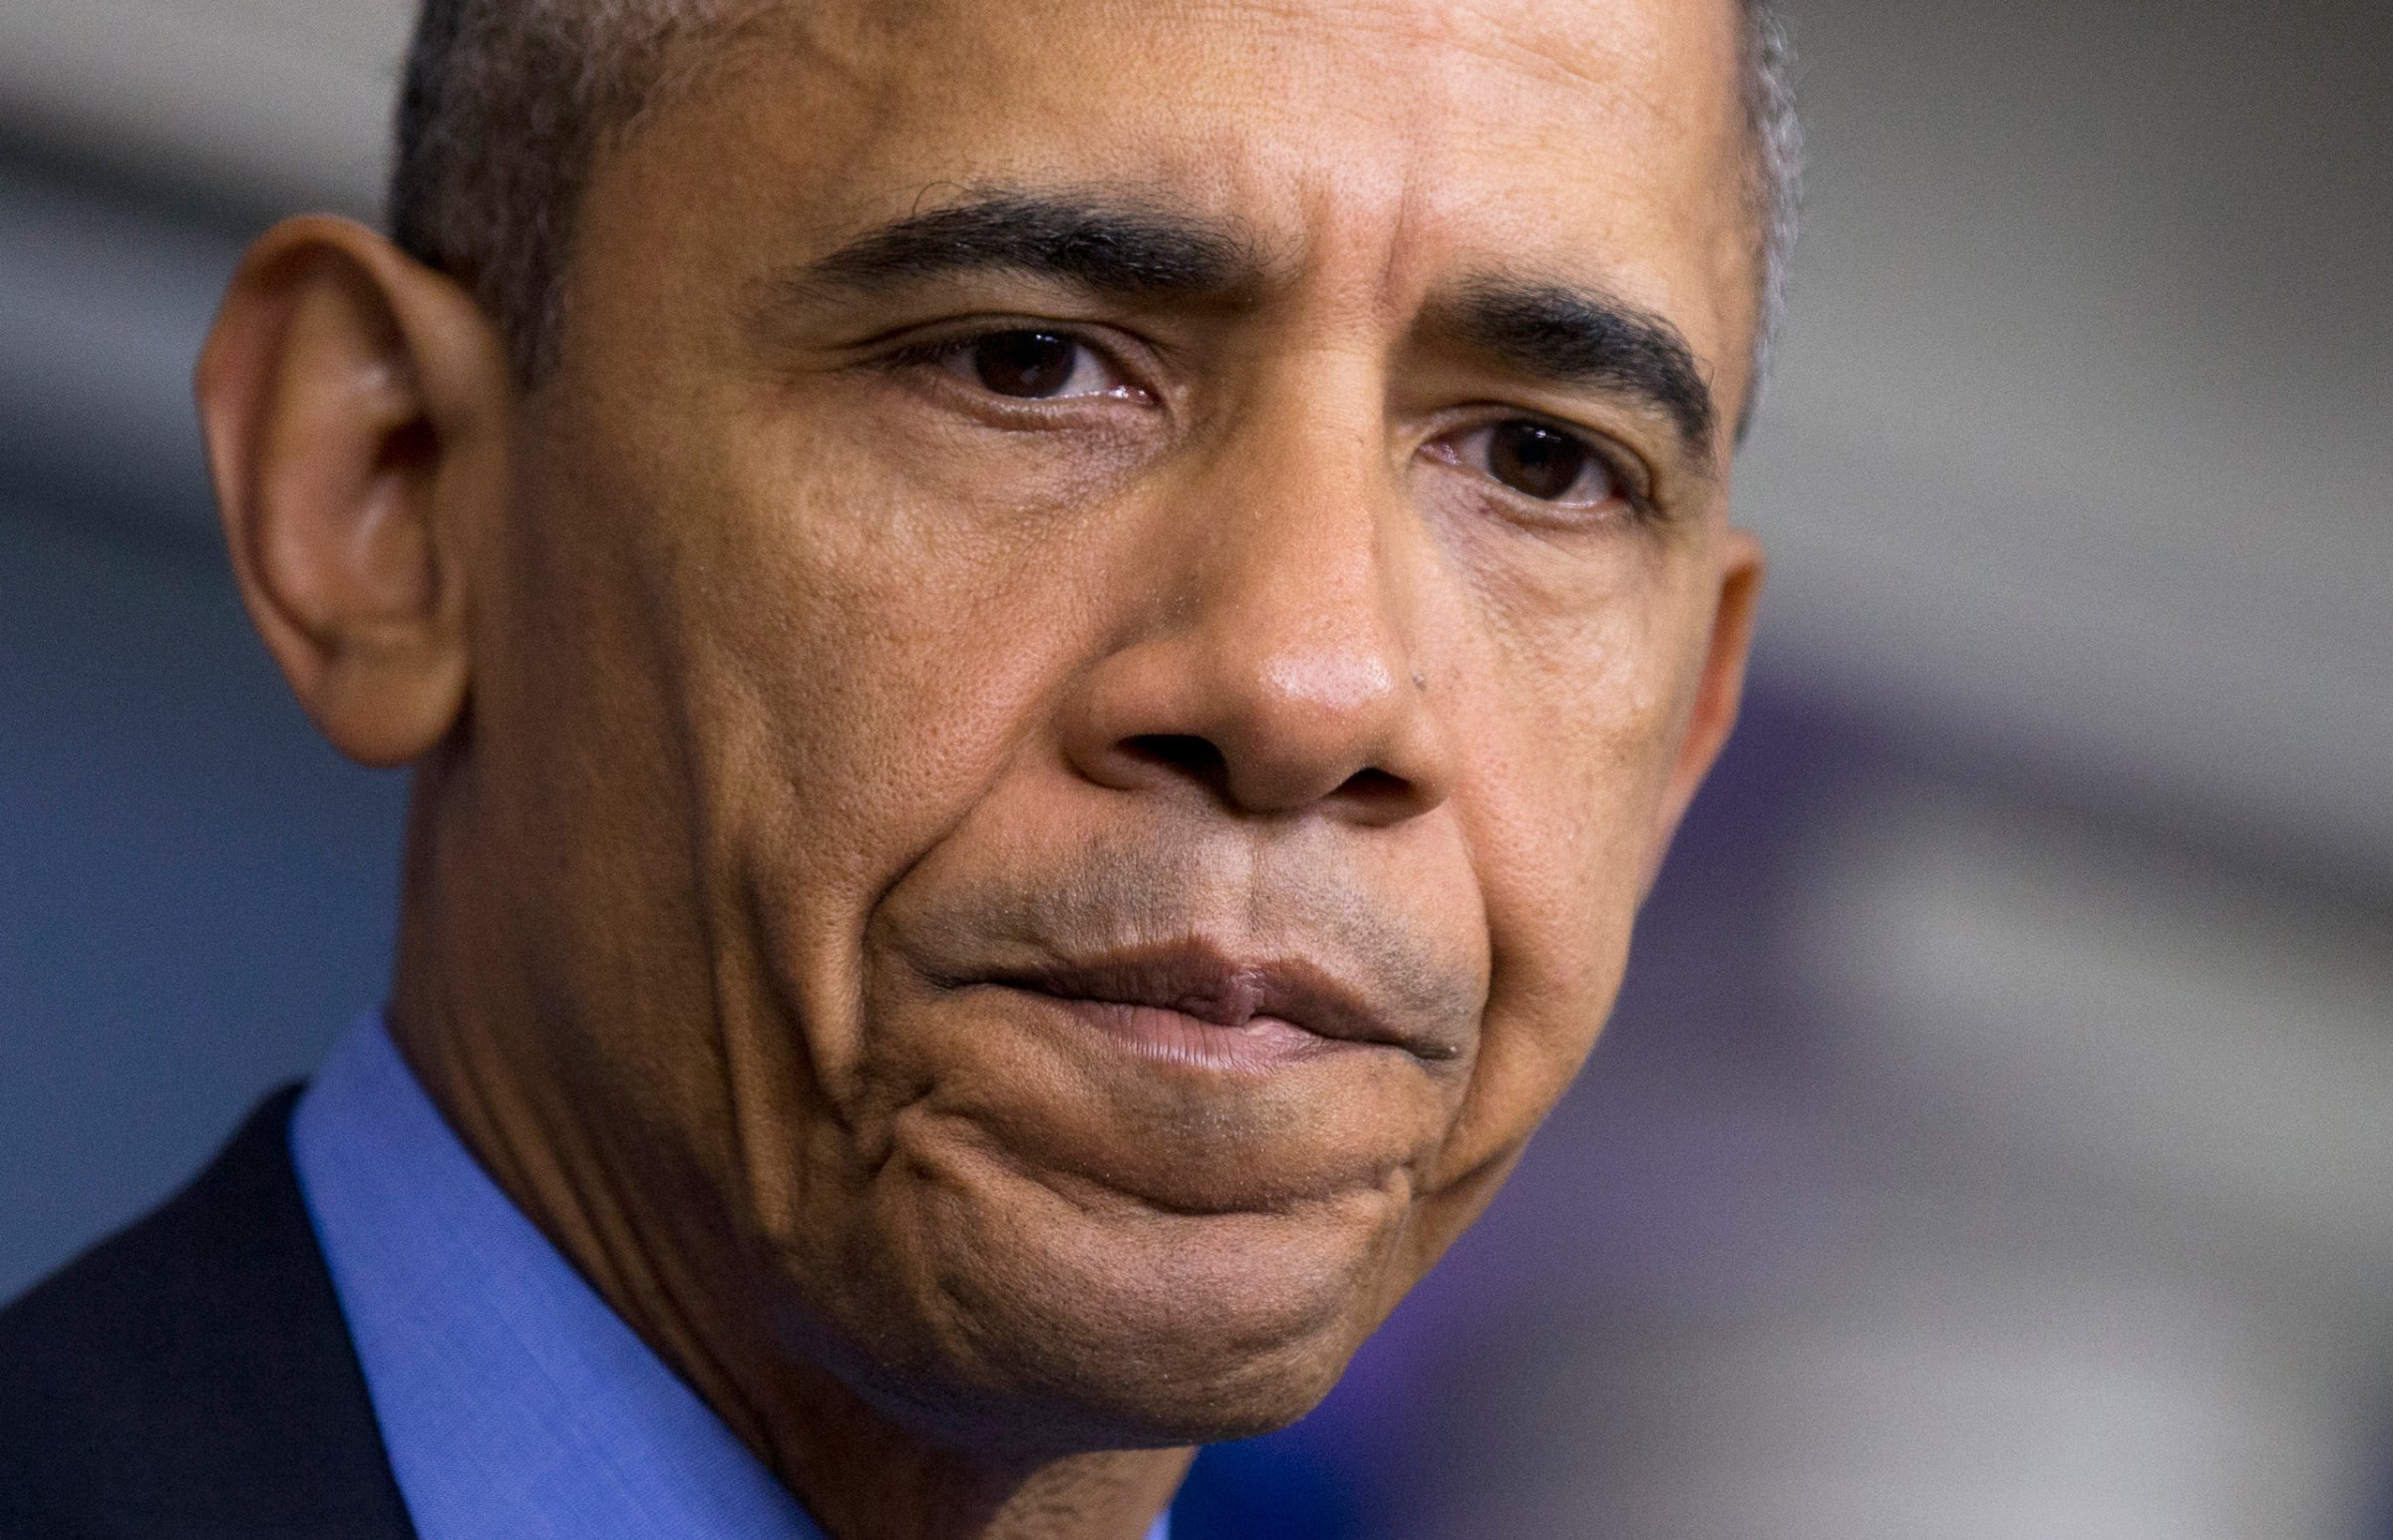 FILE - In this June 18, 2015 photo, President Barack Obama pauses while speaking in the Brady Press Briefing Room of the White House in Washington, on the church shooting in Charleston, S.C., prior to his departure to Los Angeles. After nine black parishioners were slain at a Charleston church, South Carolina did what many thought would never happen: It moved the Confederate flag off Statehouse grounds. But a year later, little has changed in Charleston. (AP Photo/Manuel Balce Ceneta, File)